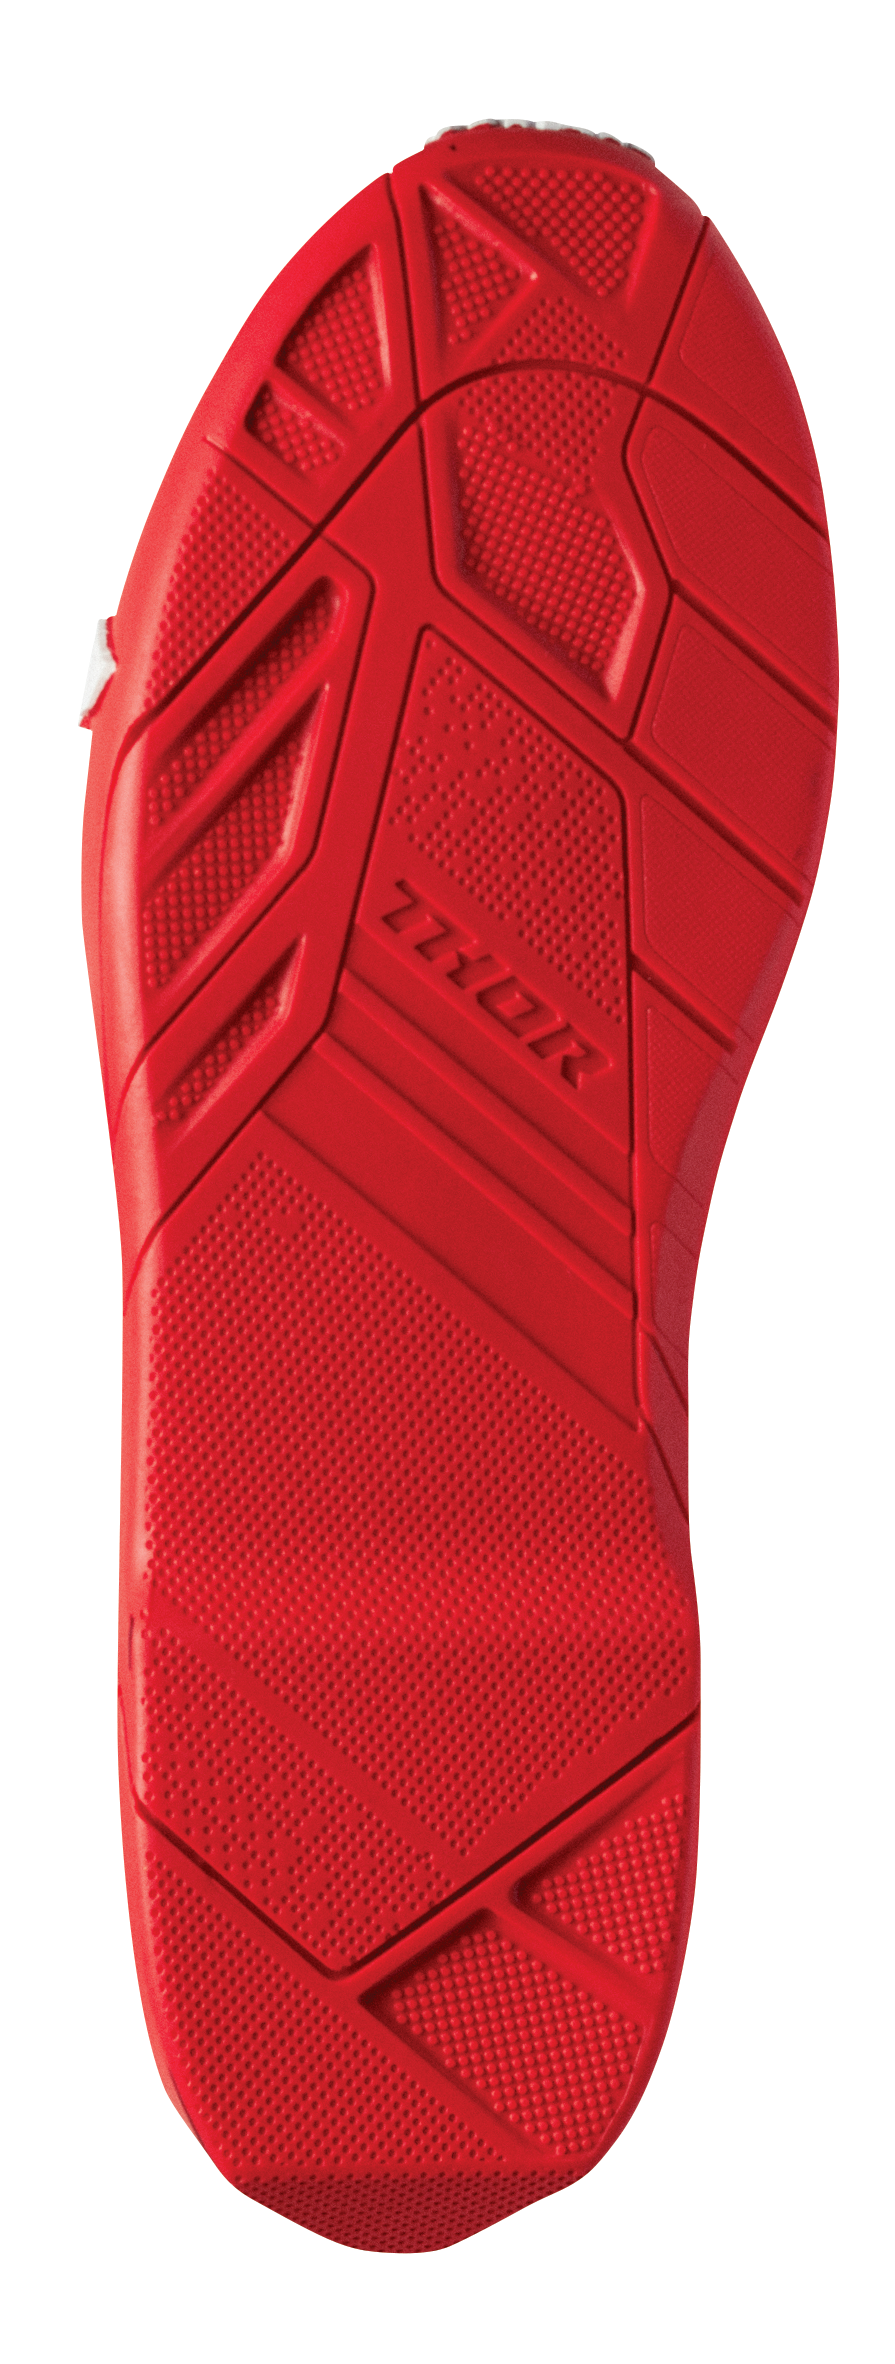 THOR Radial Boots Replacement Outsoles - Red - Size 12-13 3430-1001